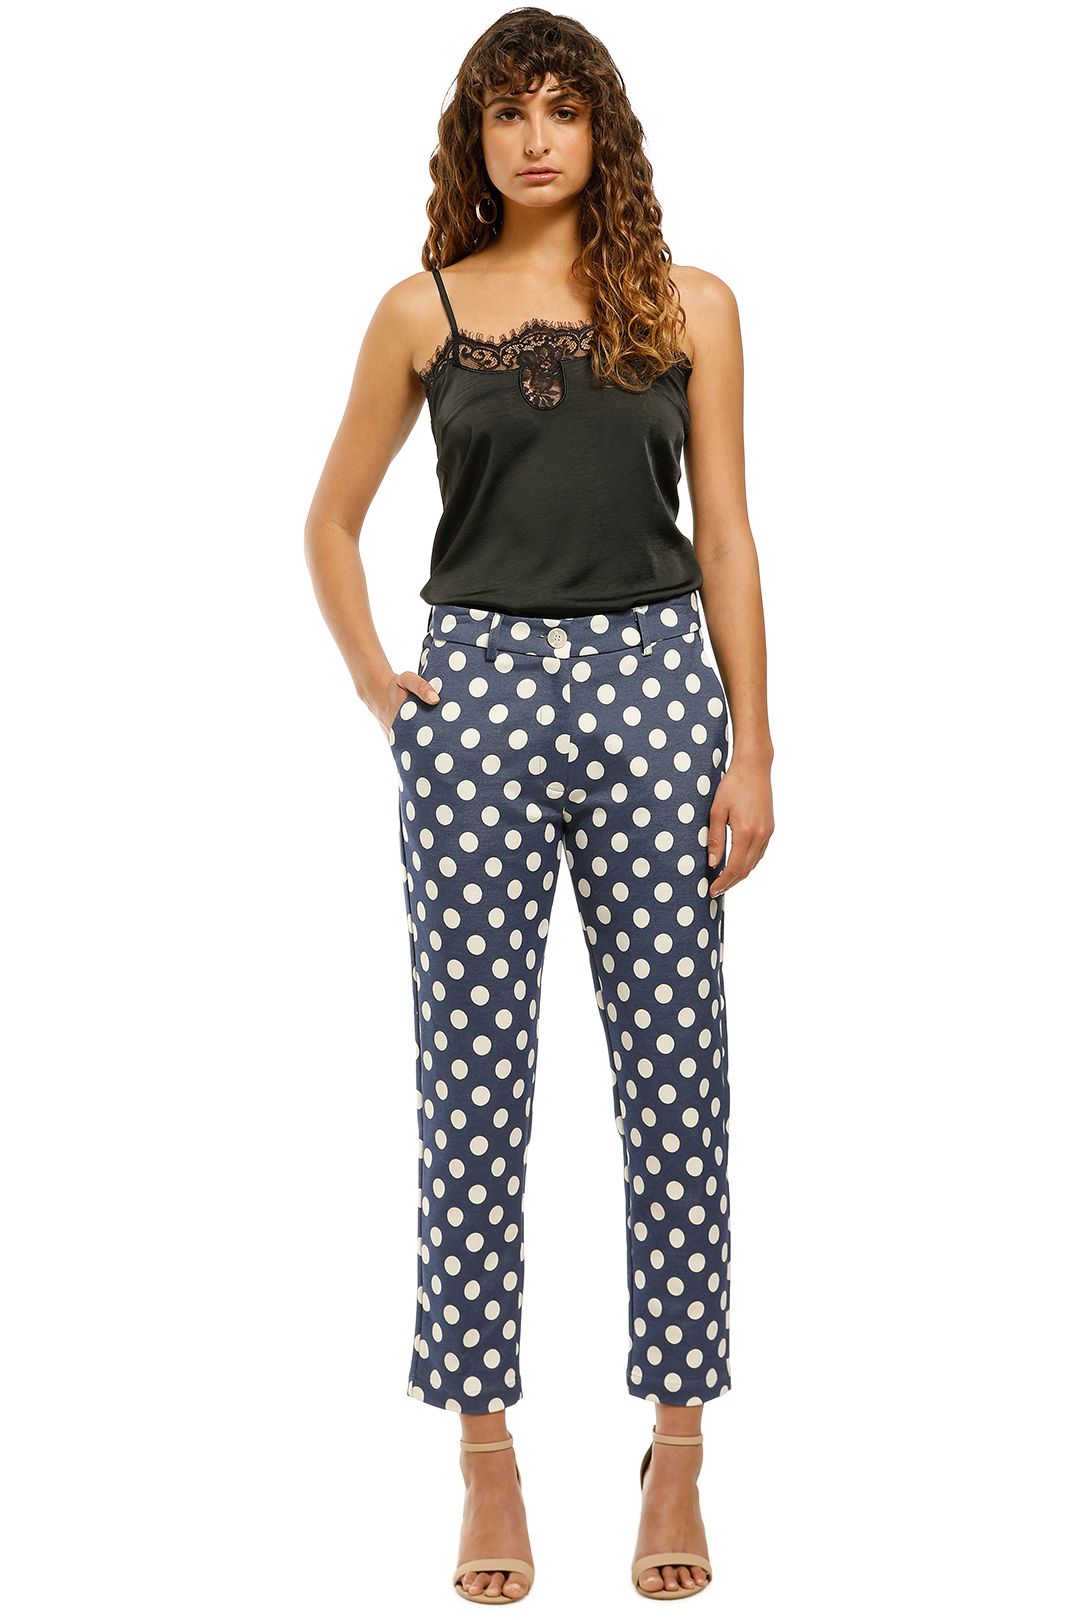 Cooper-by-Trelise-Cooper-I-Spot-You-Pant-Blue-Cream-Spot-Front